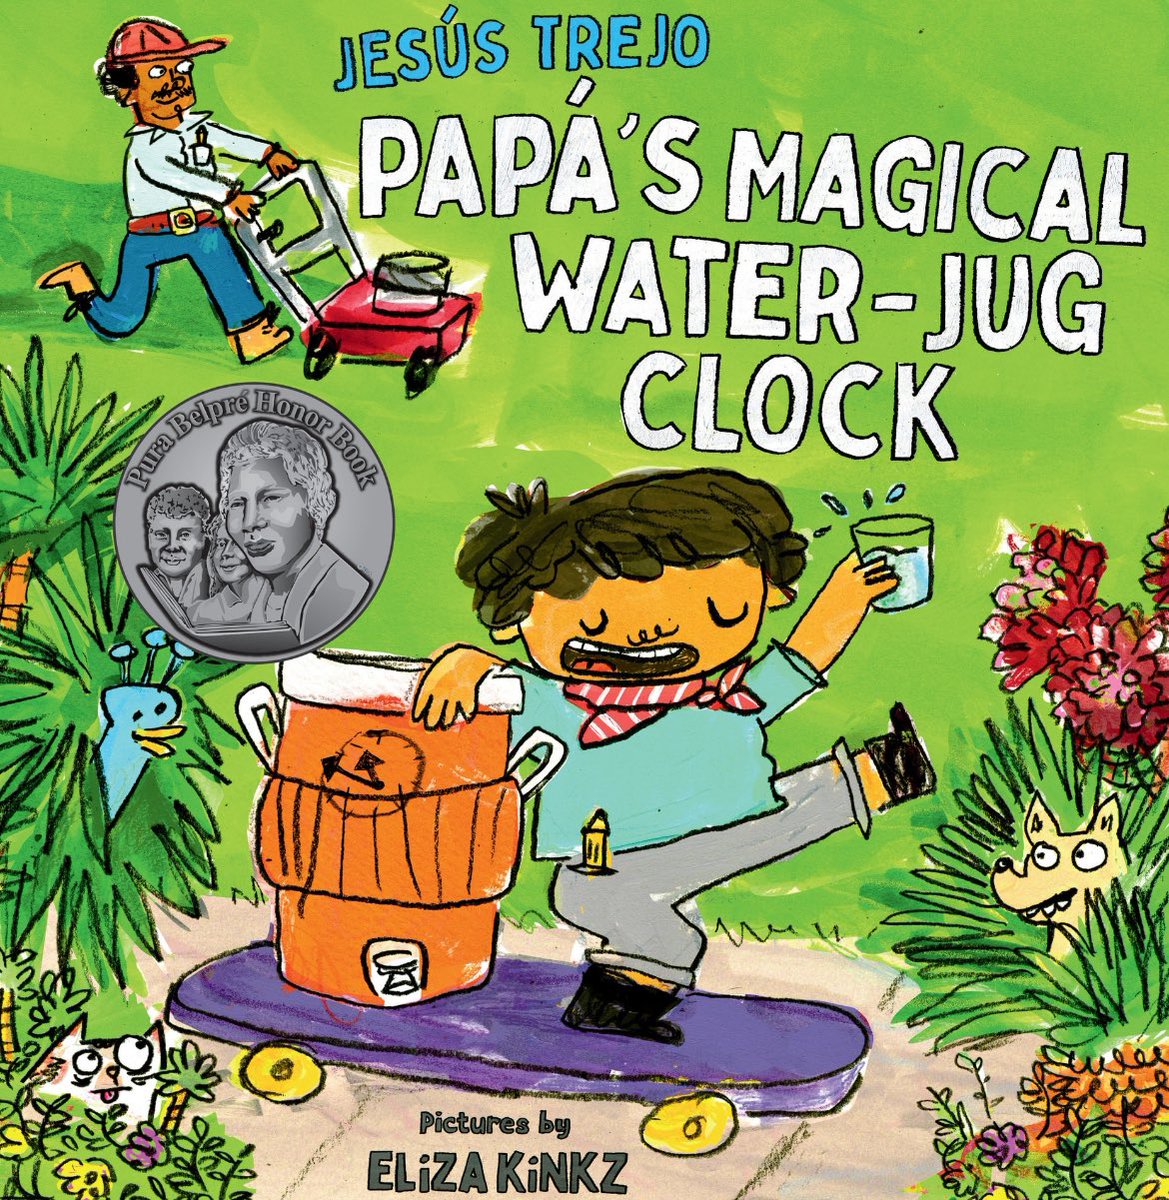 I start the day with a magical #picturebook @JesusTrejo ‘s very funny Papá’s Magical Water-Jug Clock illustrated by @elizalinkz @astrapublishing #kidlit @worldkidlit